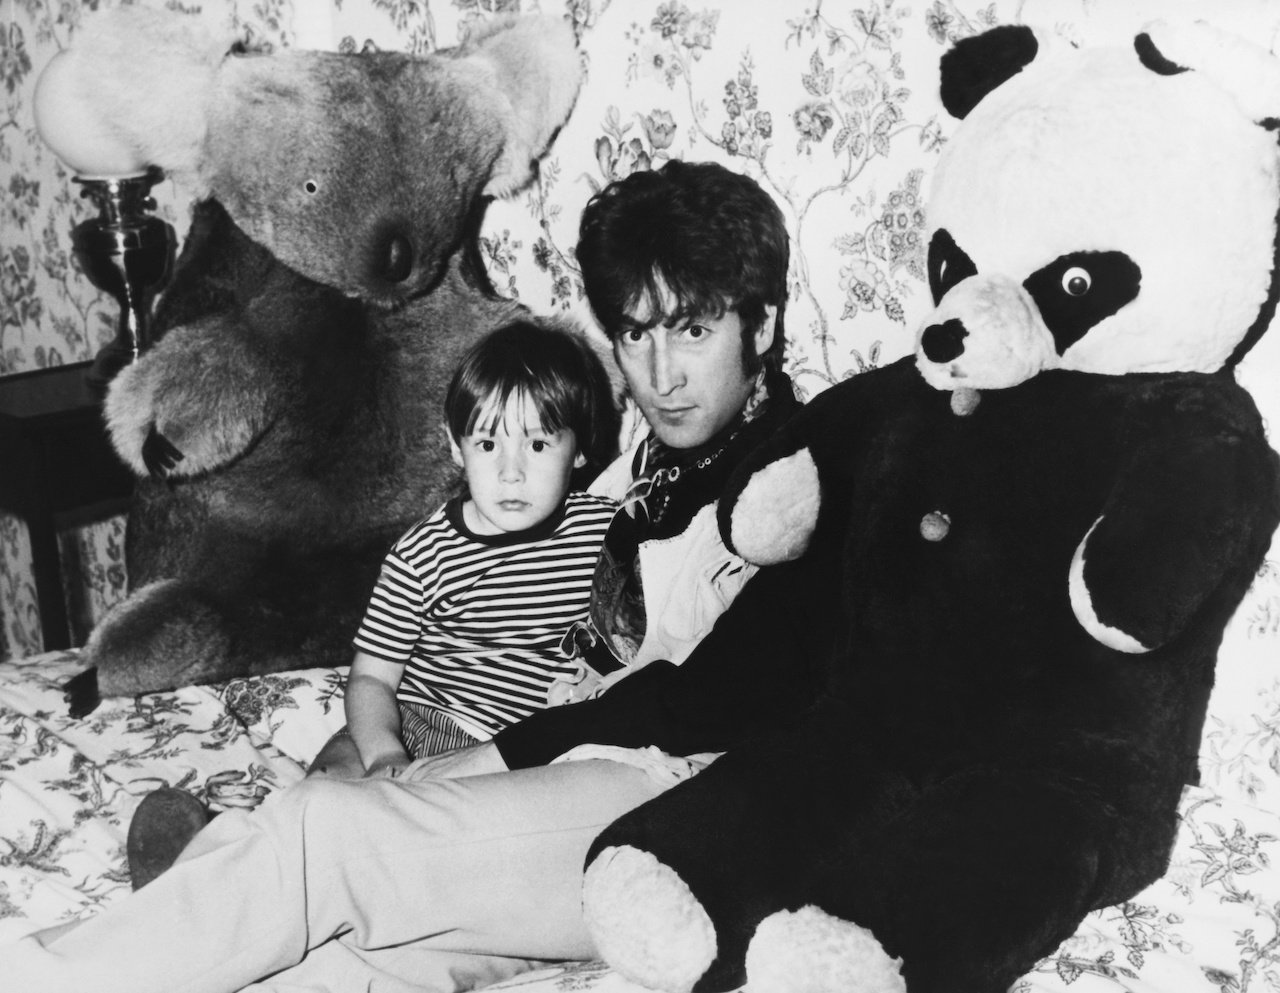 John Lennon and his son Julian pose with stuffed animals in 1968